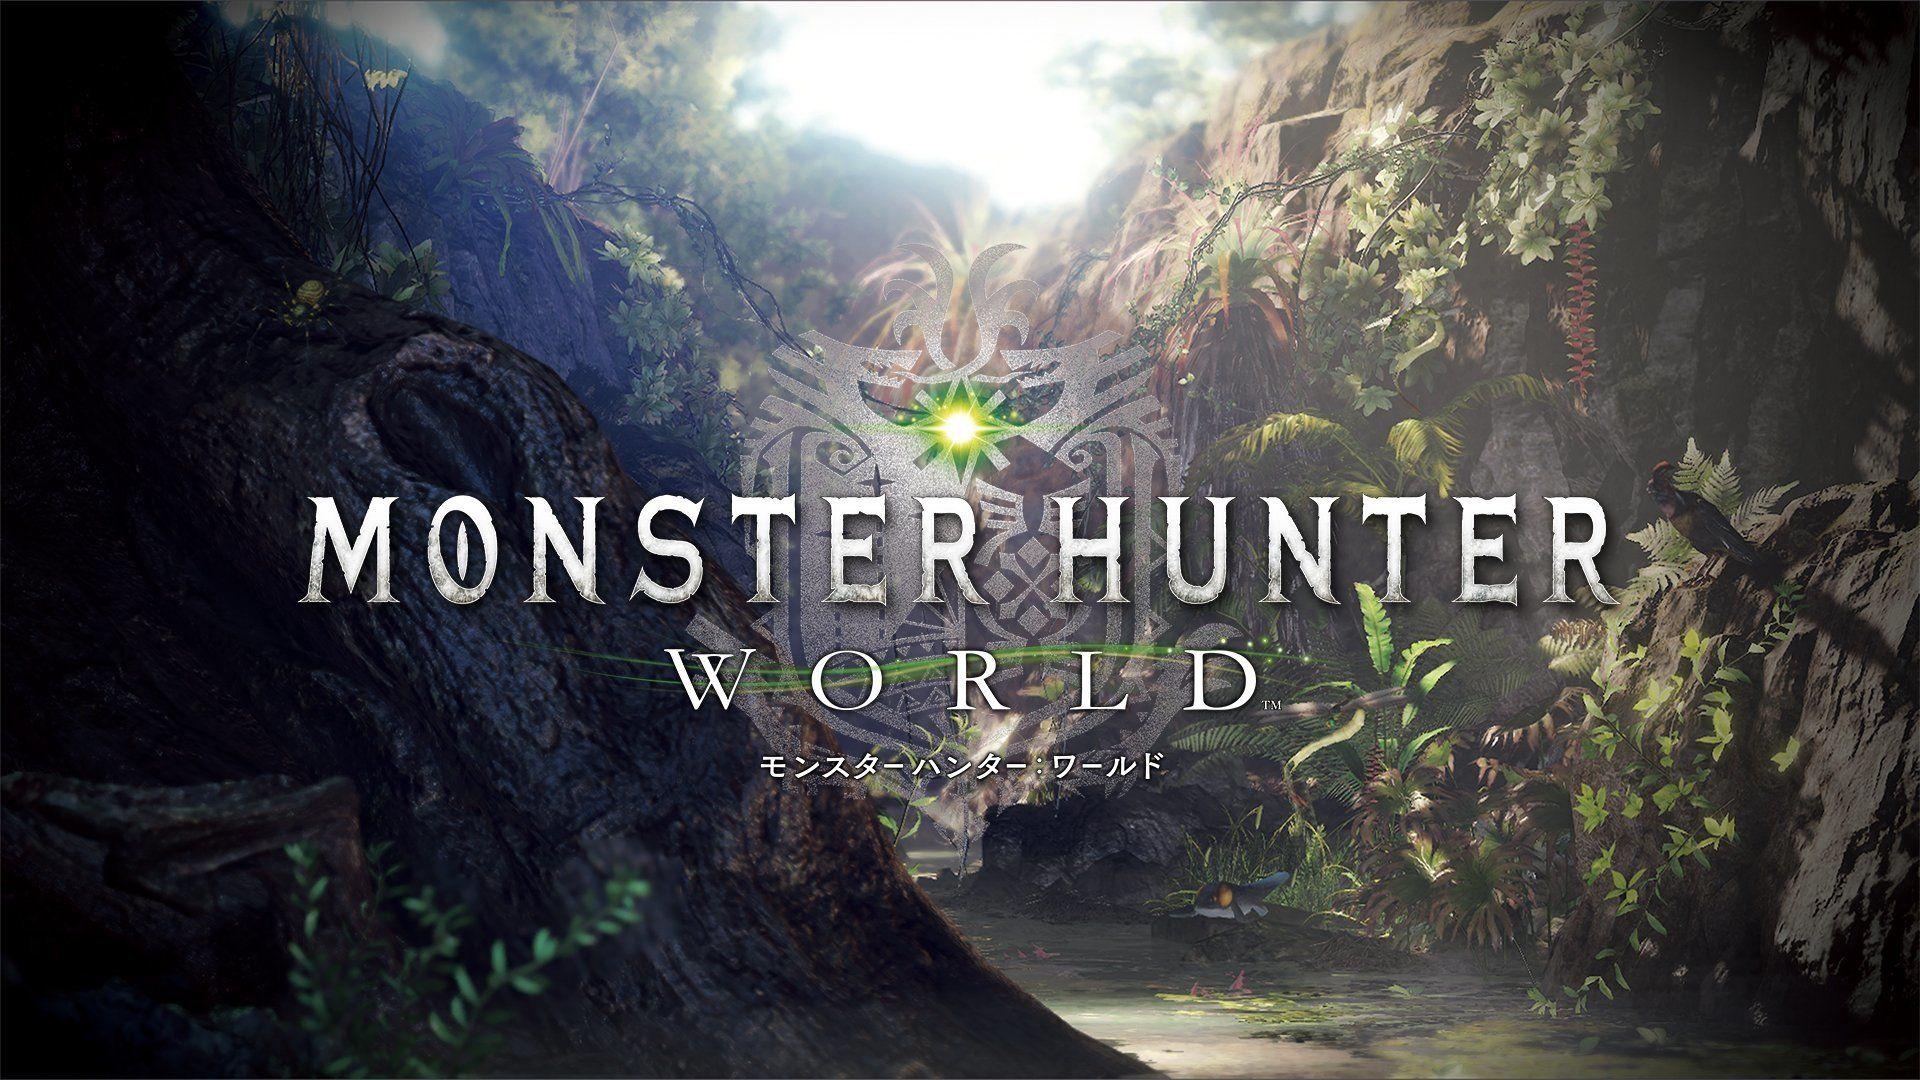 Monster Hunter HD Wallpapers Backgrounds Wallpaper  HD Wallpapers   Pinterest  Monster hunter Hd wallpaper and Wallpaper